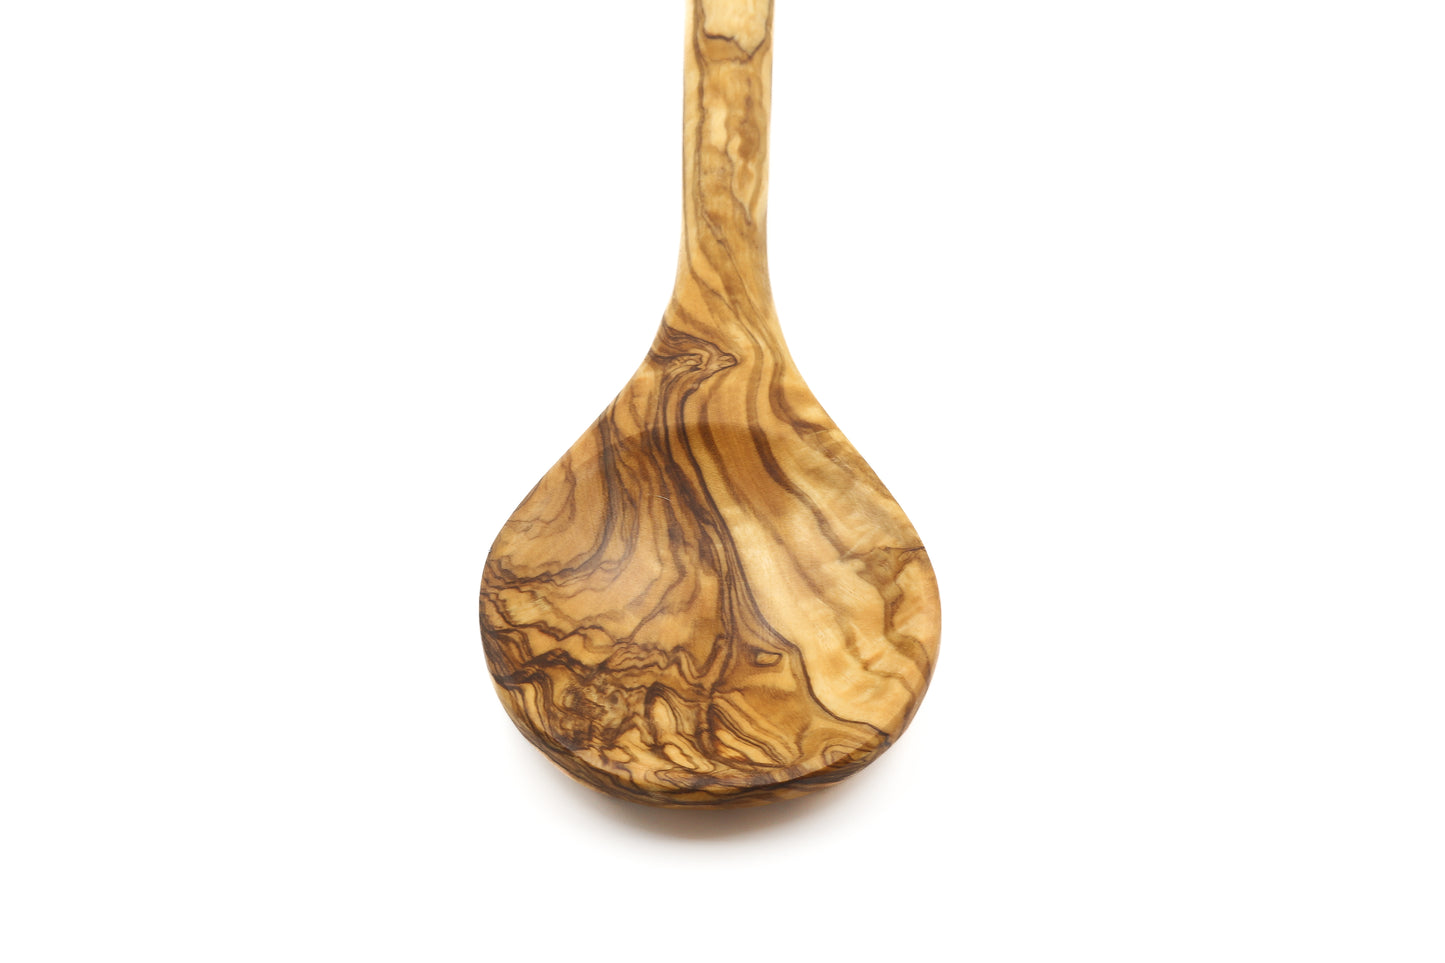 Perfect for all your cooking needs, this olive wood utensil